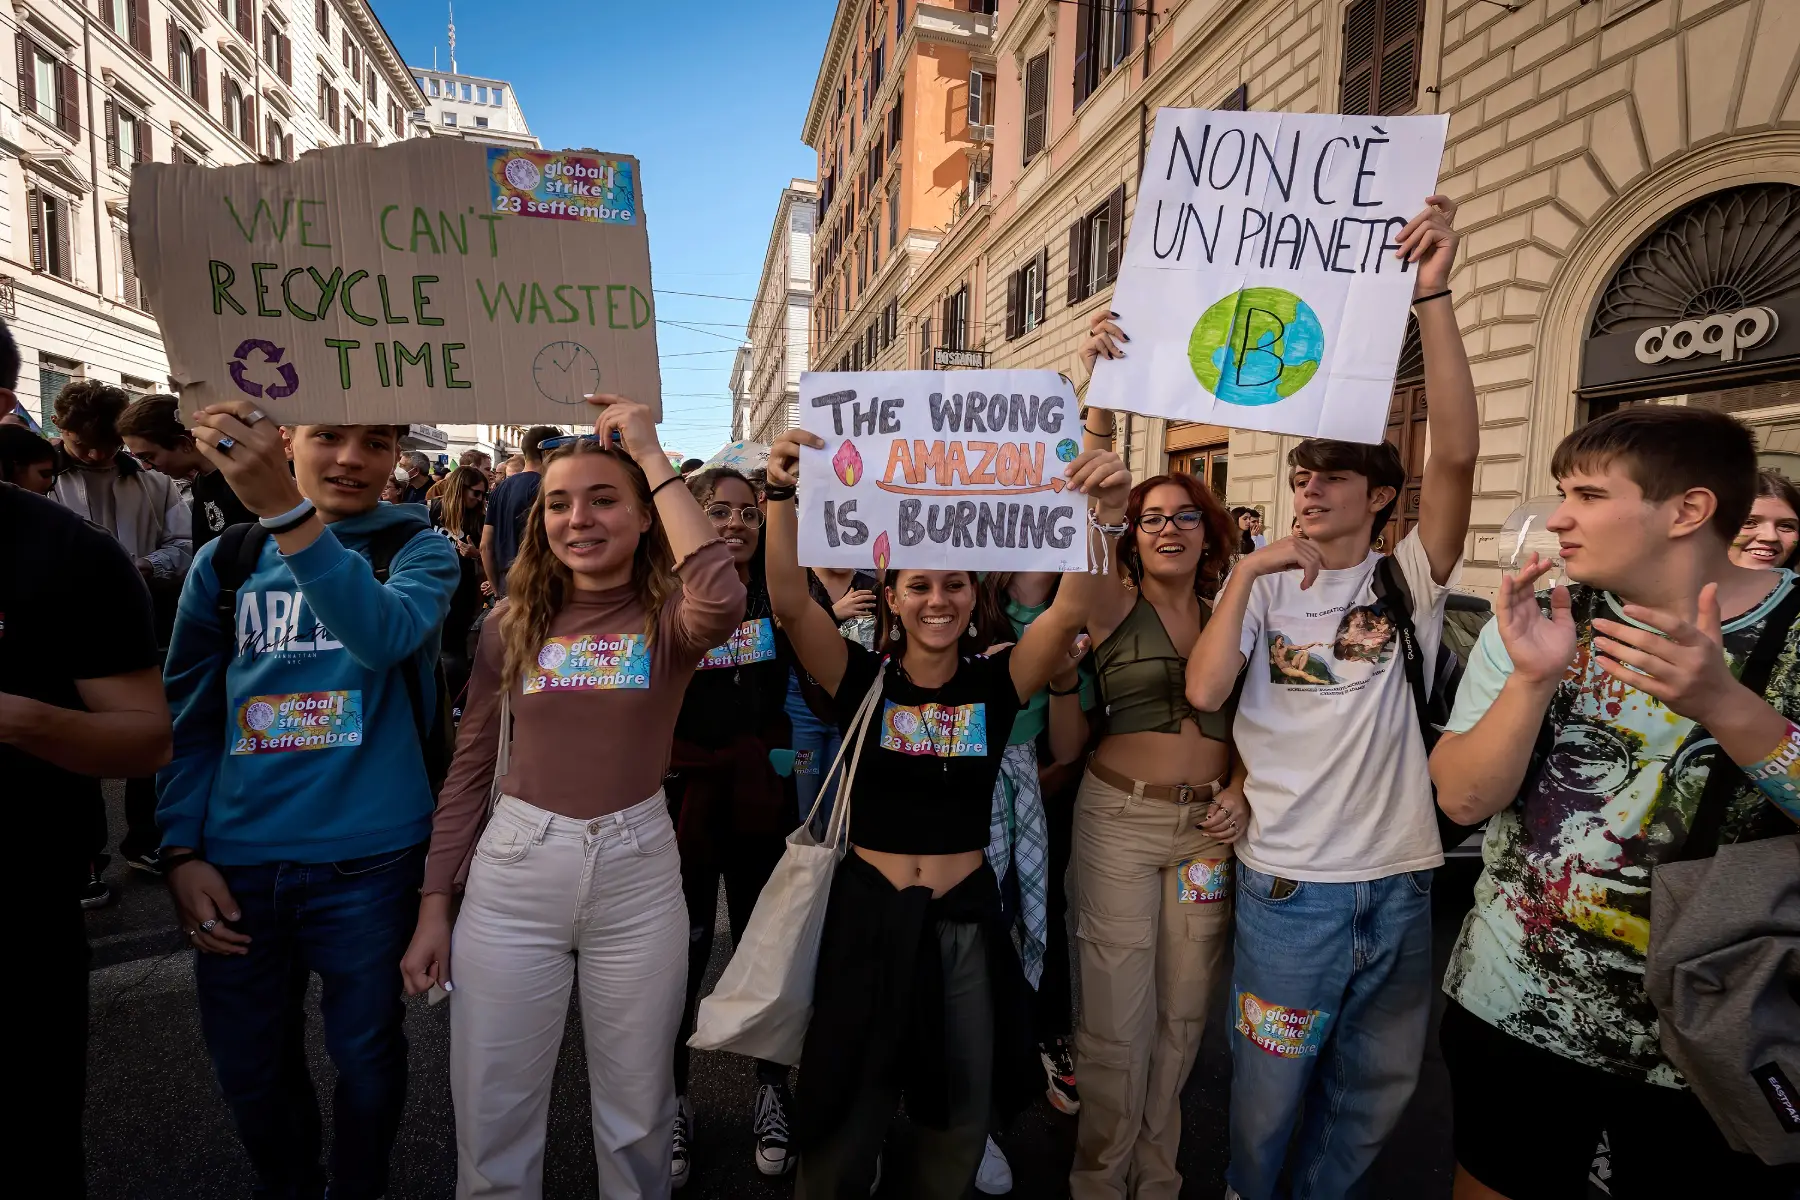 Protesters at a Fridays for Future Climate Action in Rome, Italy